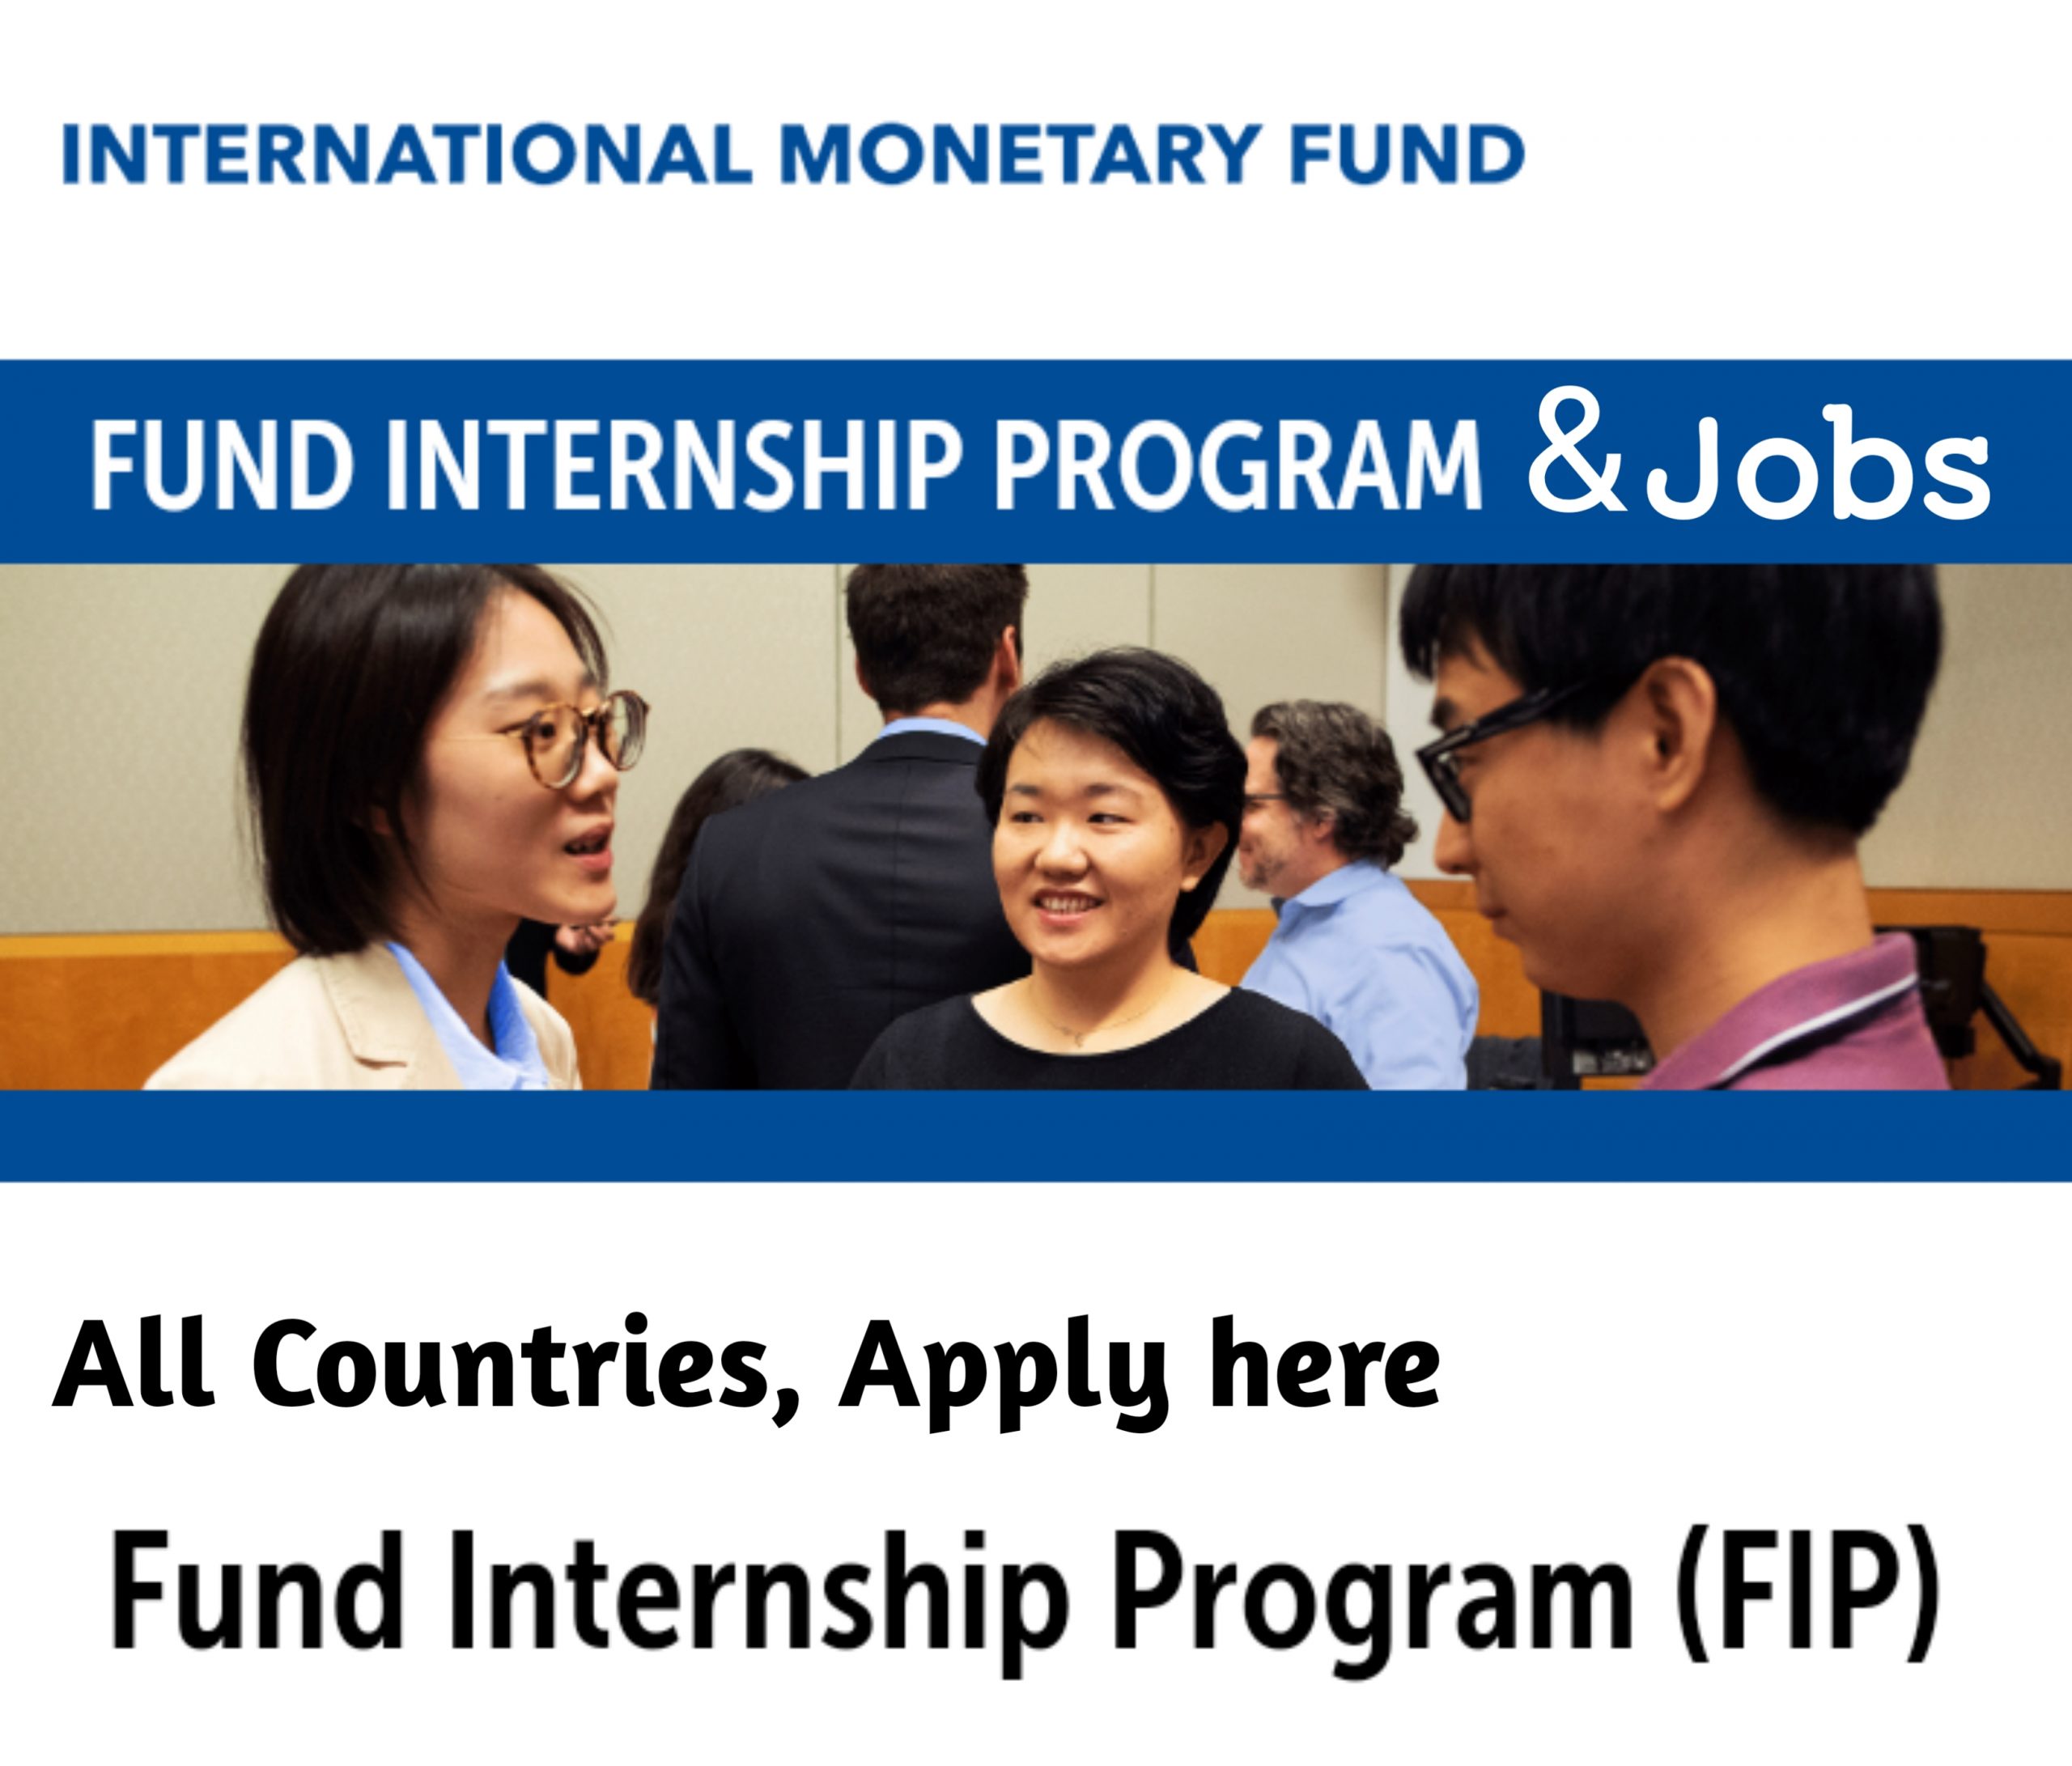 20221003 090622 scaled - International Monetary Funds Fully paid Internship and Jobs